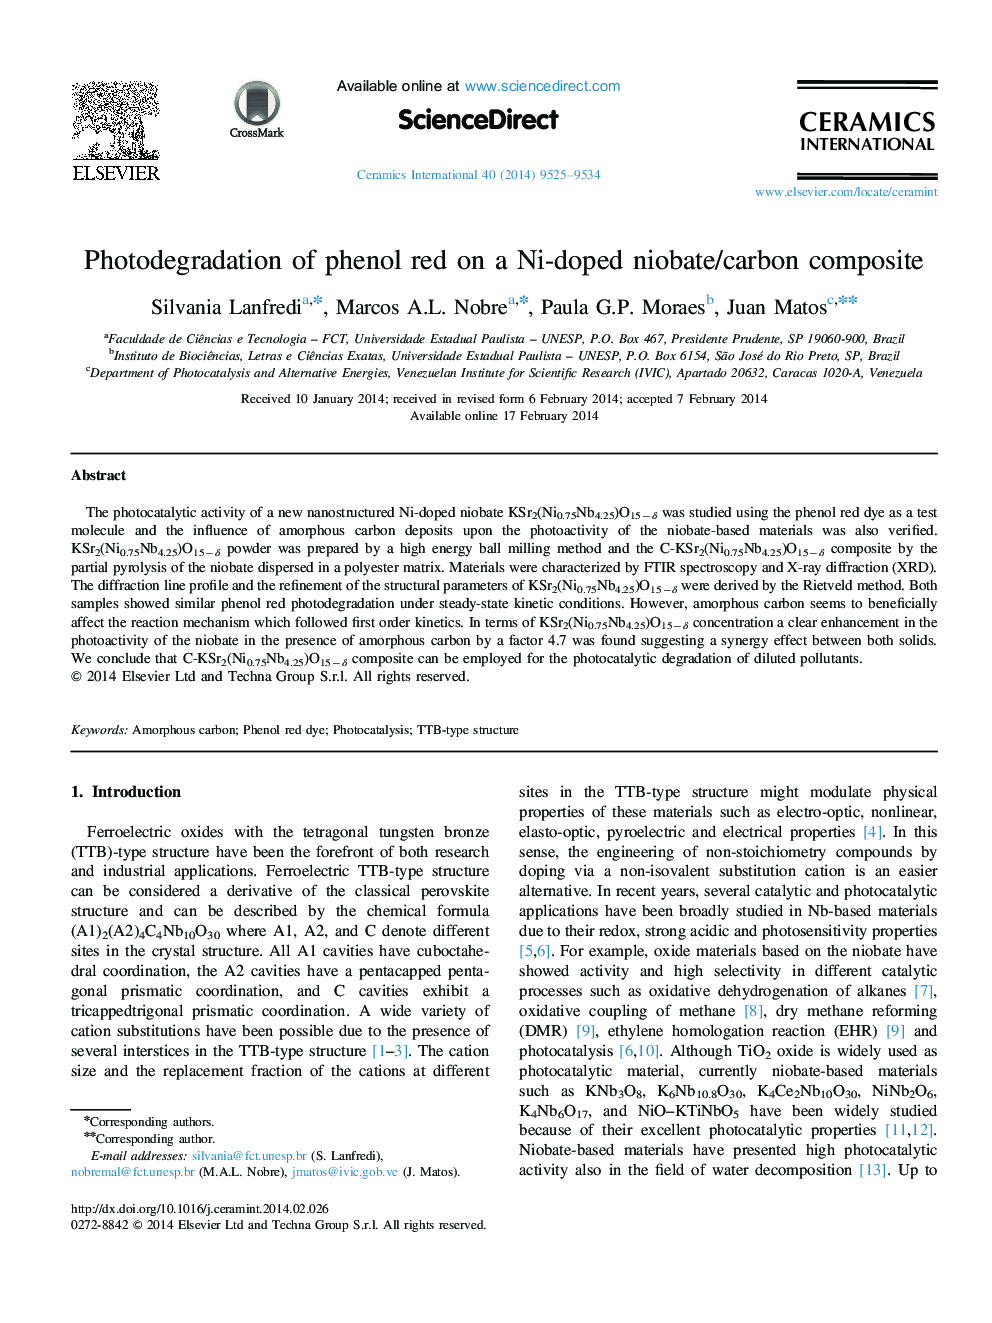 Photodegradation of phenol red on a Ni-doped niobate/carbon composite